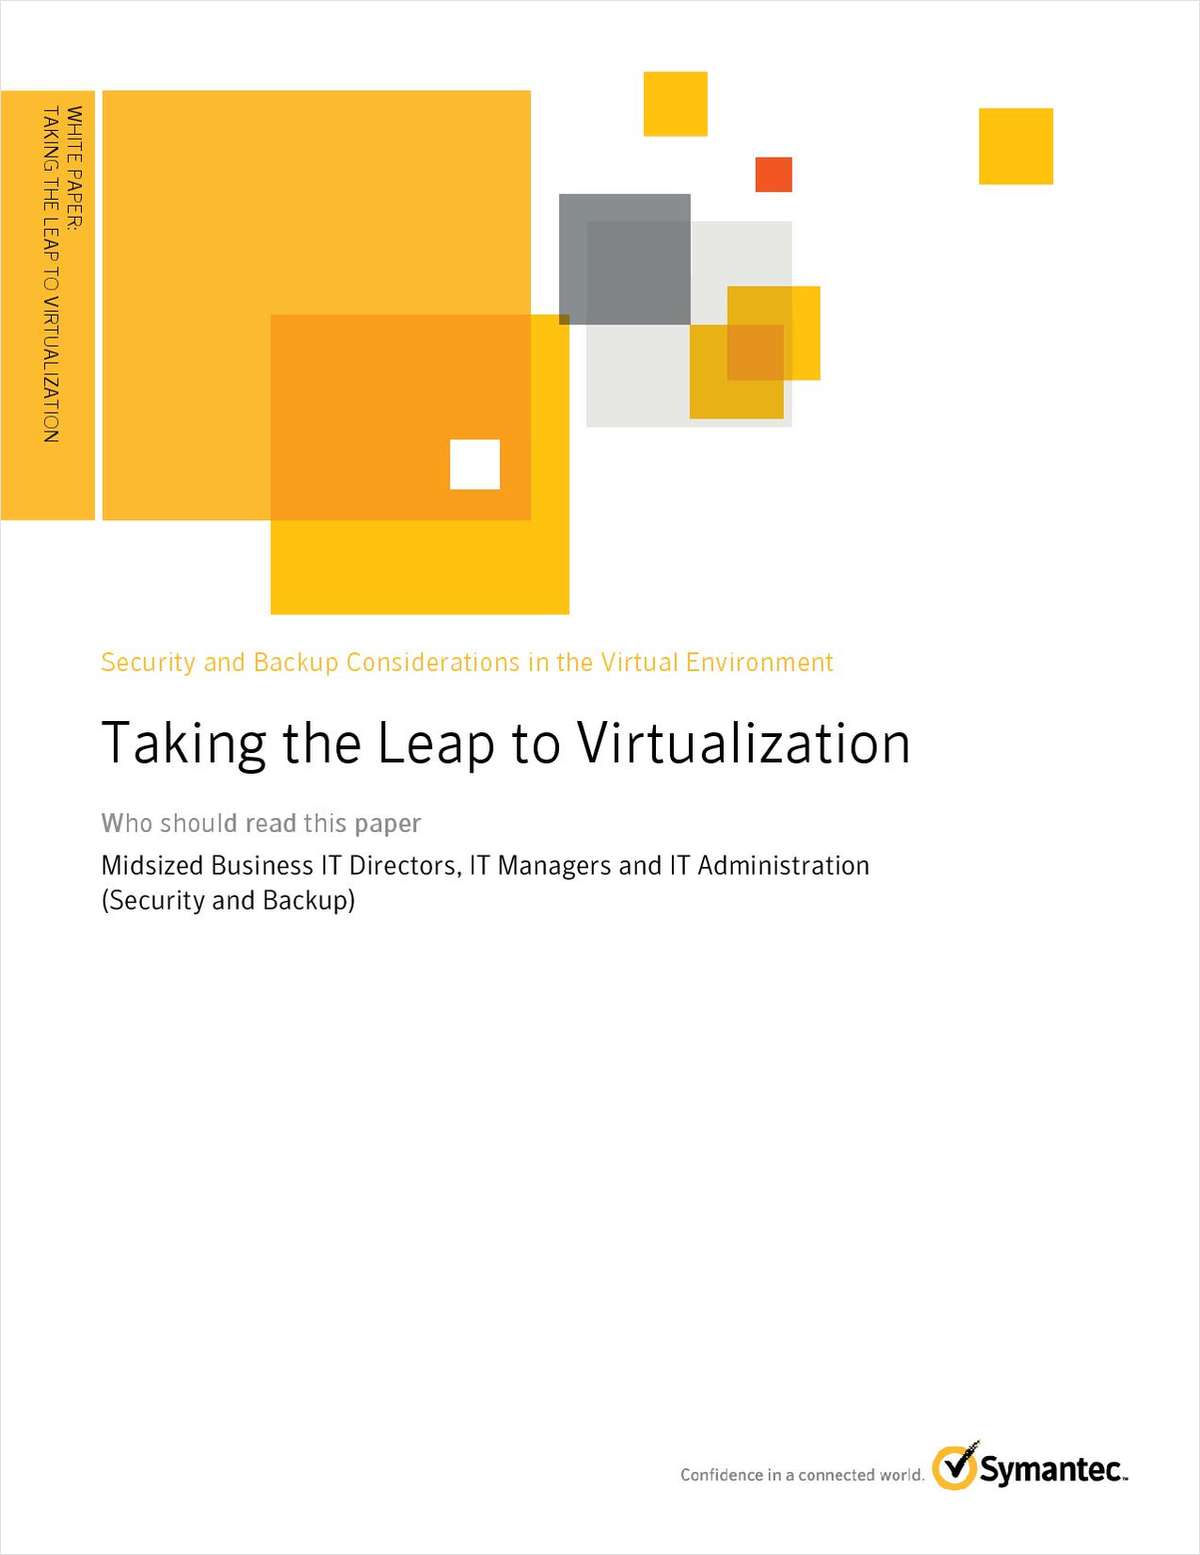 Taking the Leap to Virtualization